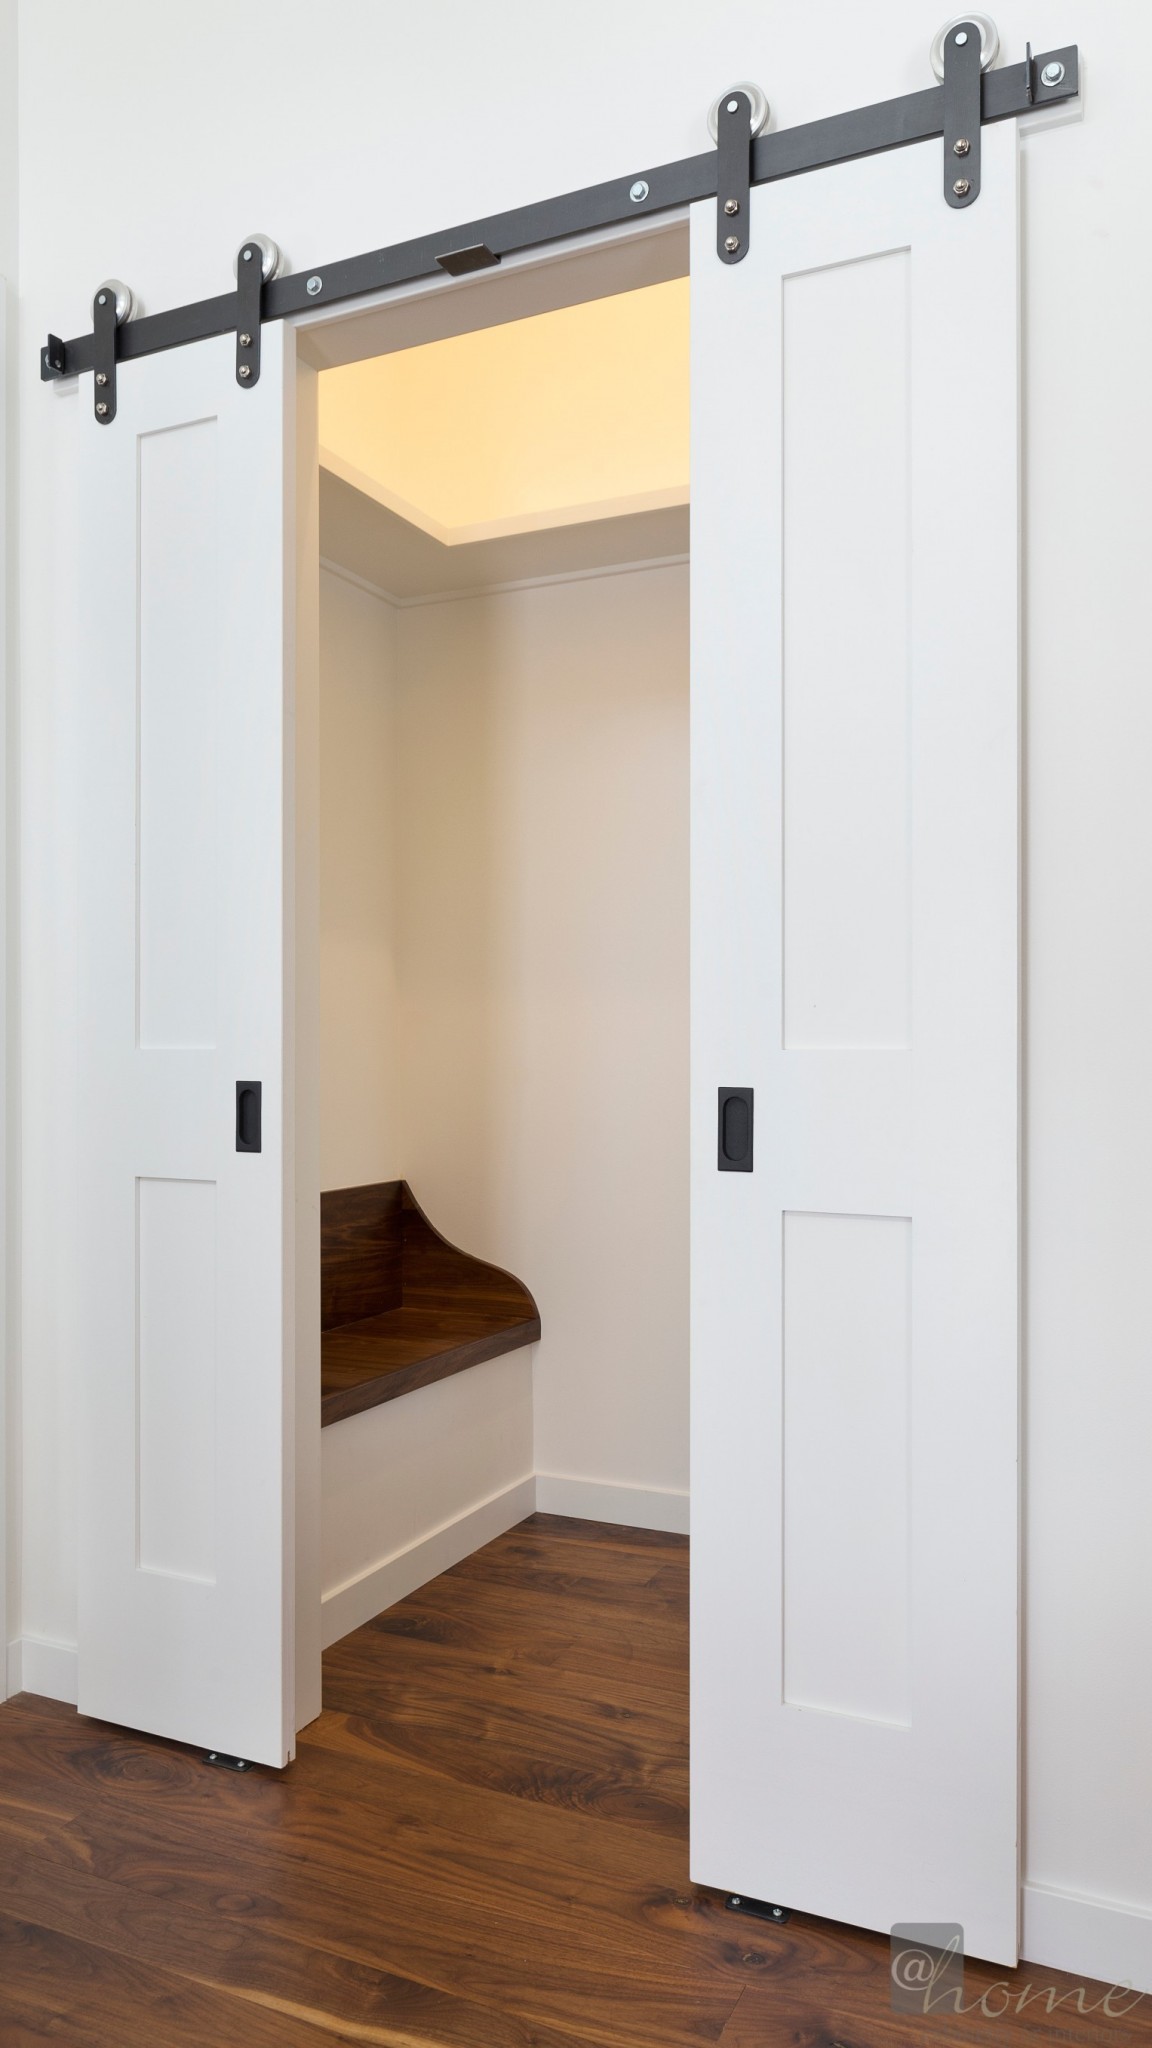 Foyer “Coat Room” featuring popular barn doors & a boot bench. Build out by Jenema builders.